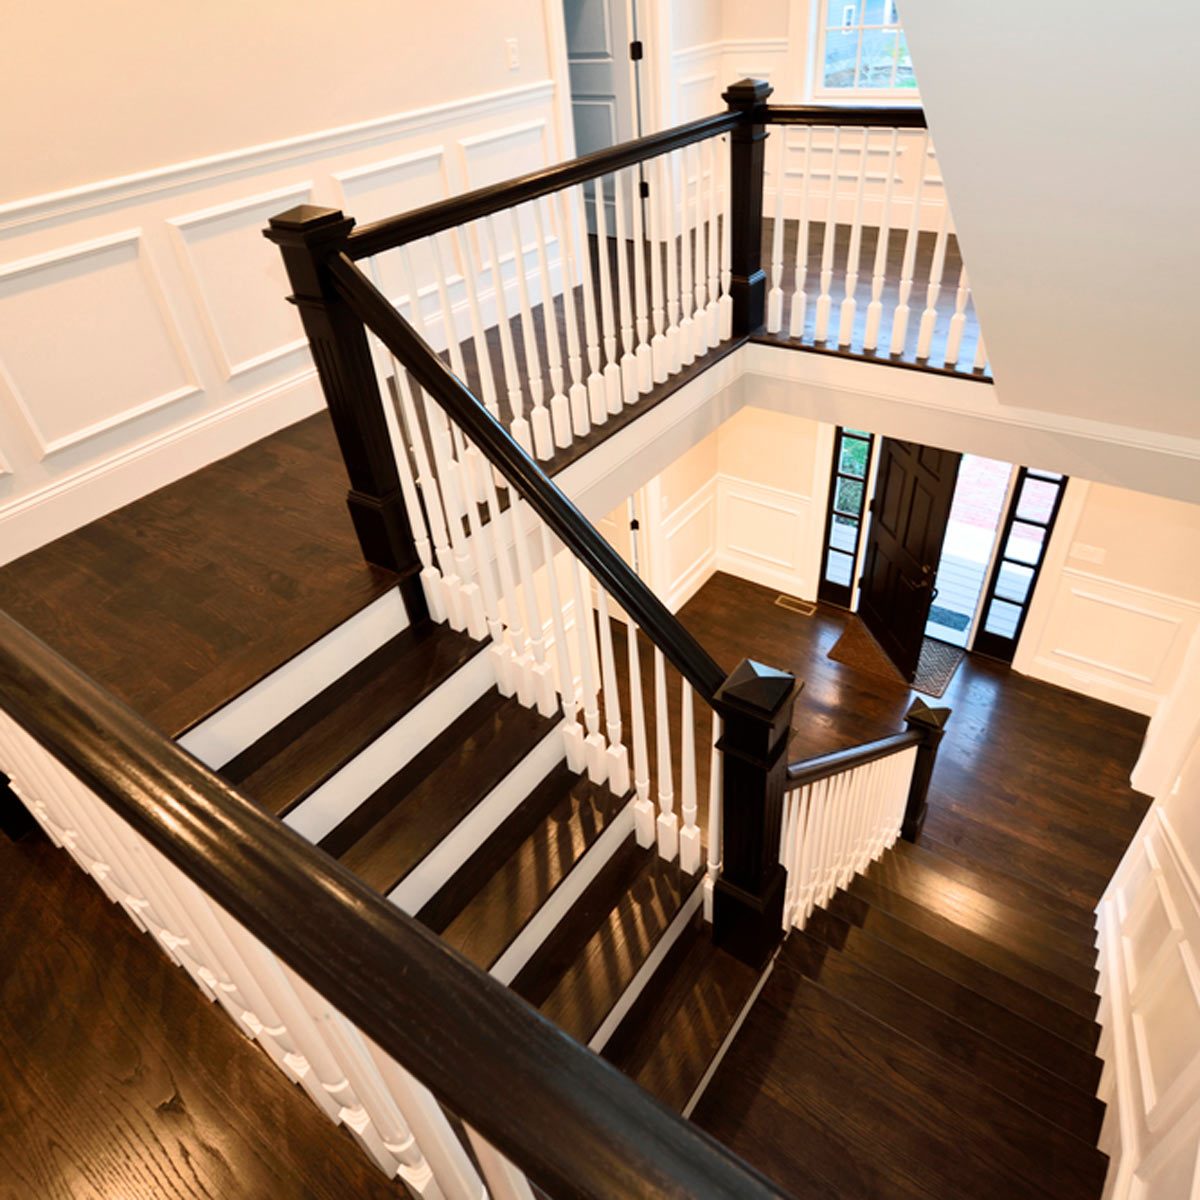 50 Stair Railing Ideas to Dress Up Your Entryway | HGTV